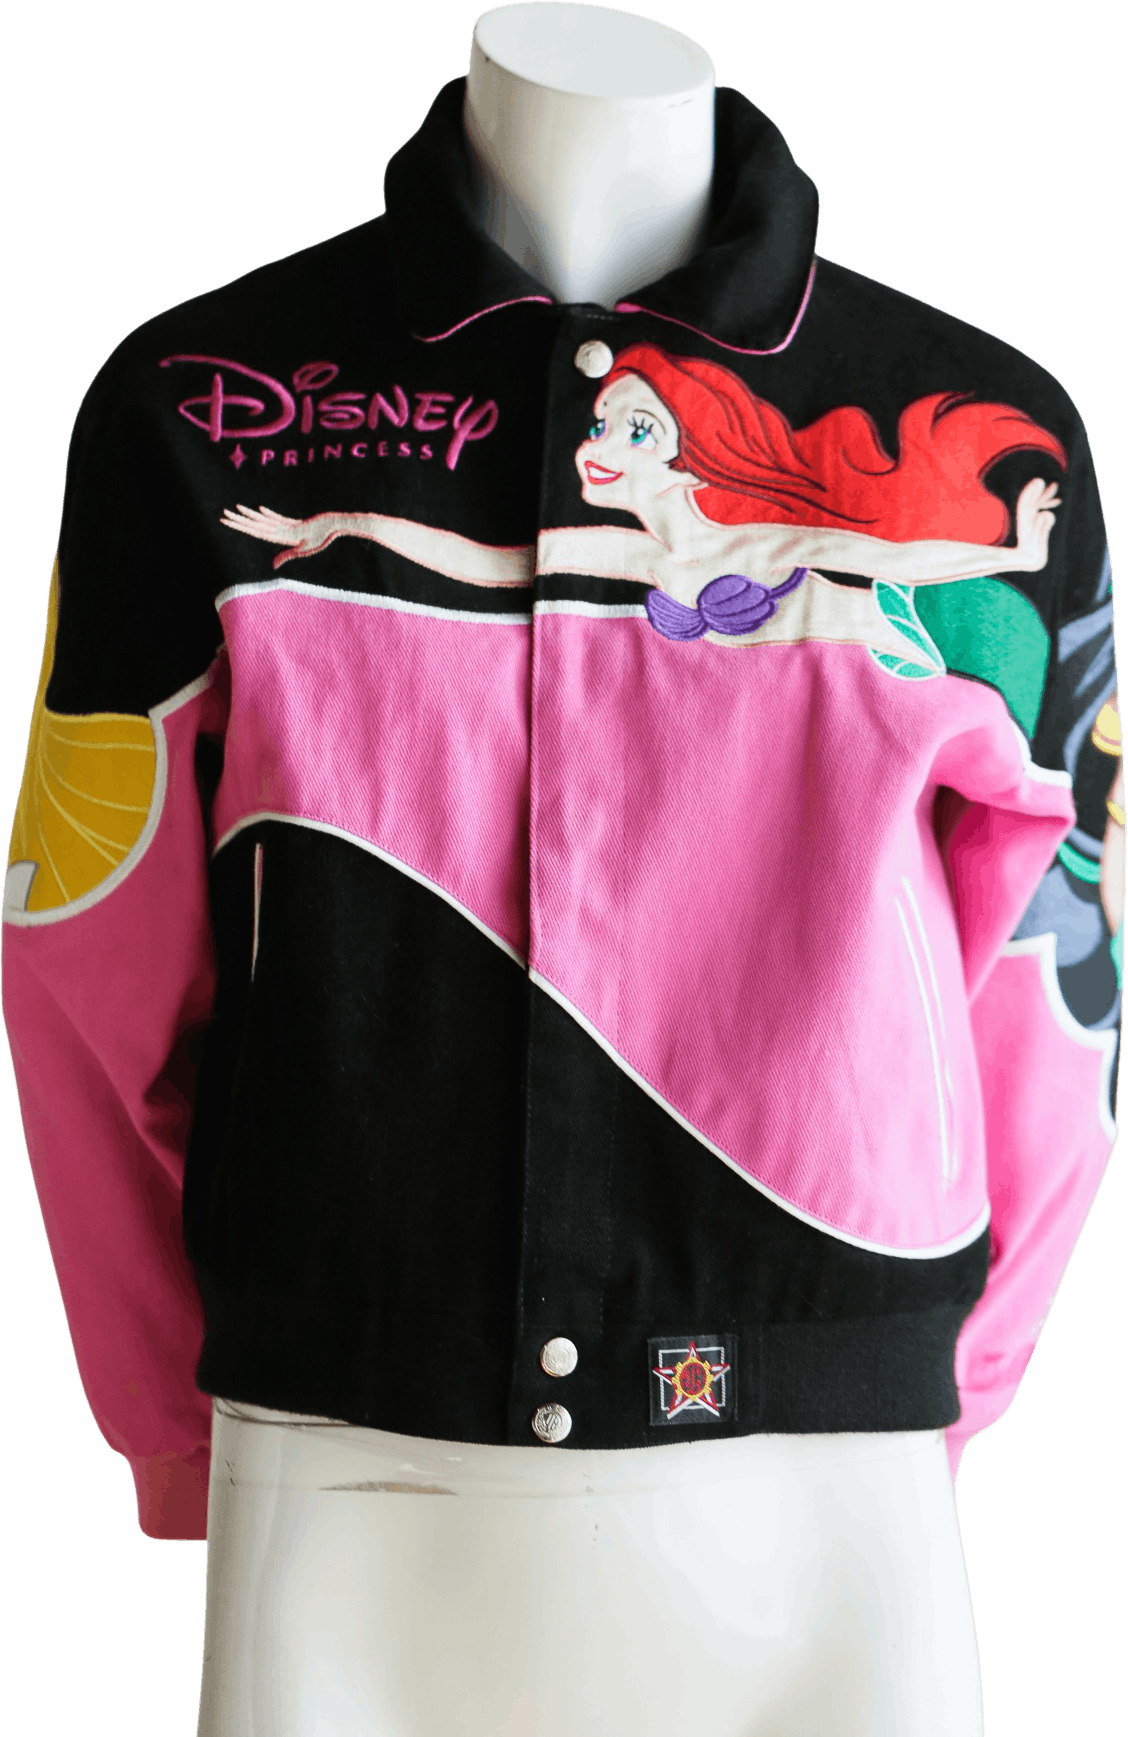 Vintage Disney Princess Embroidered Canvas Racing Jacket by Jh